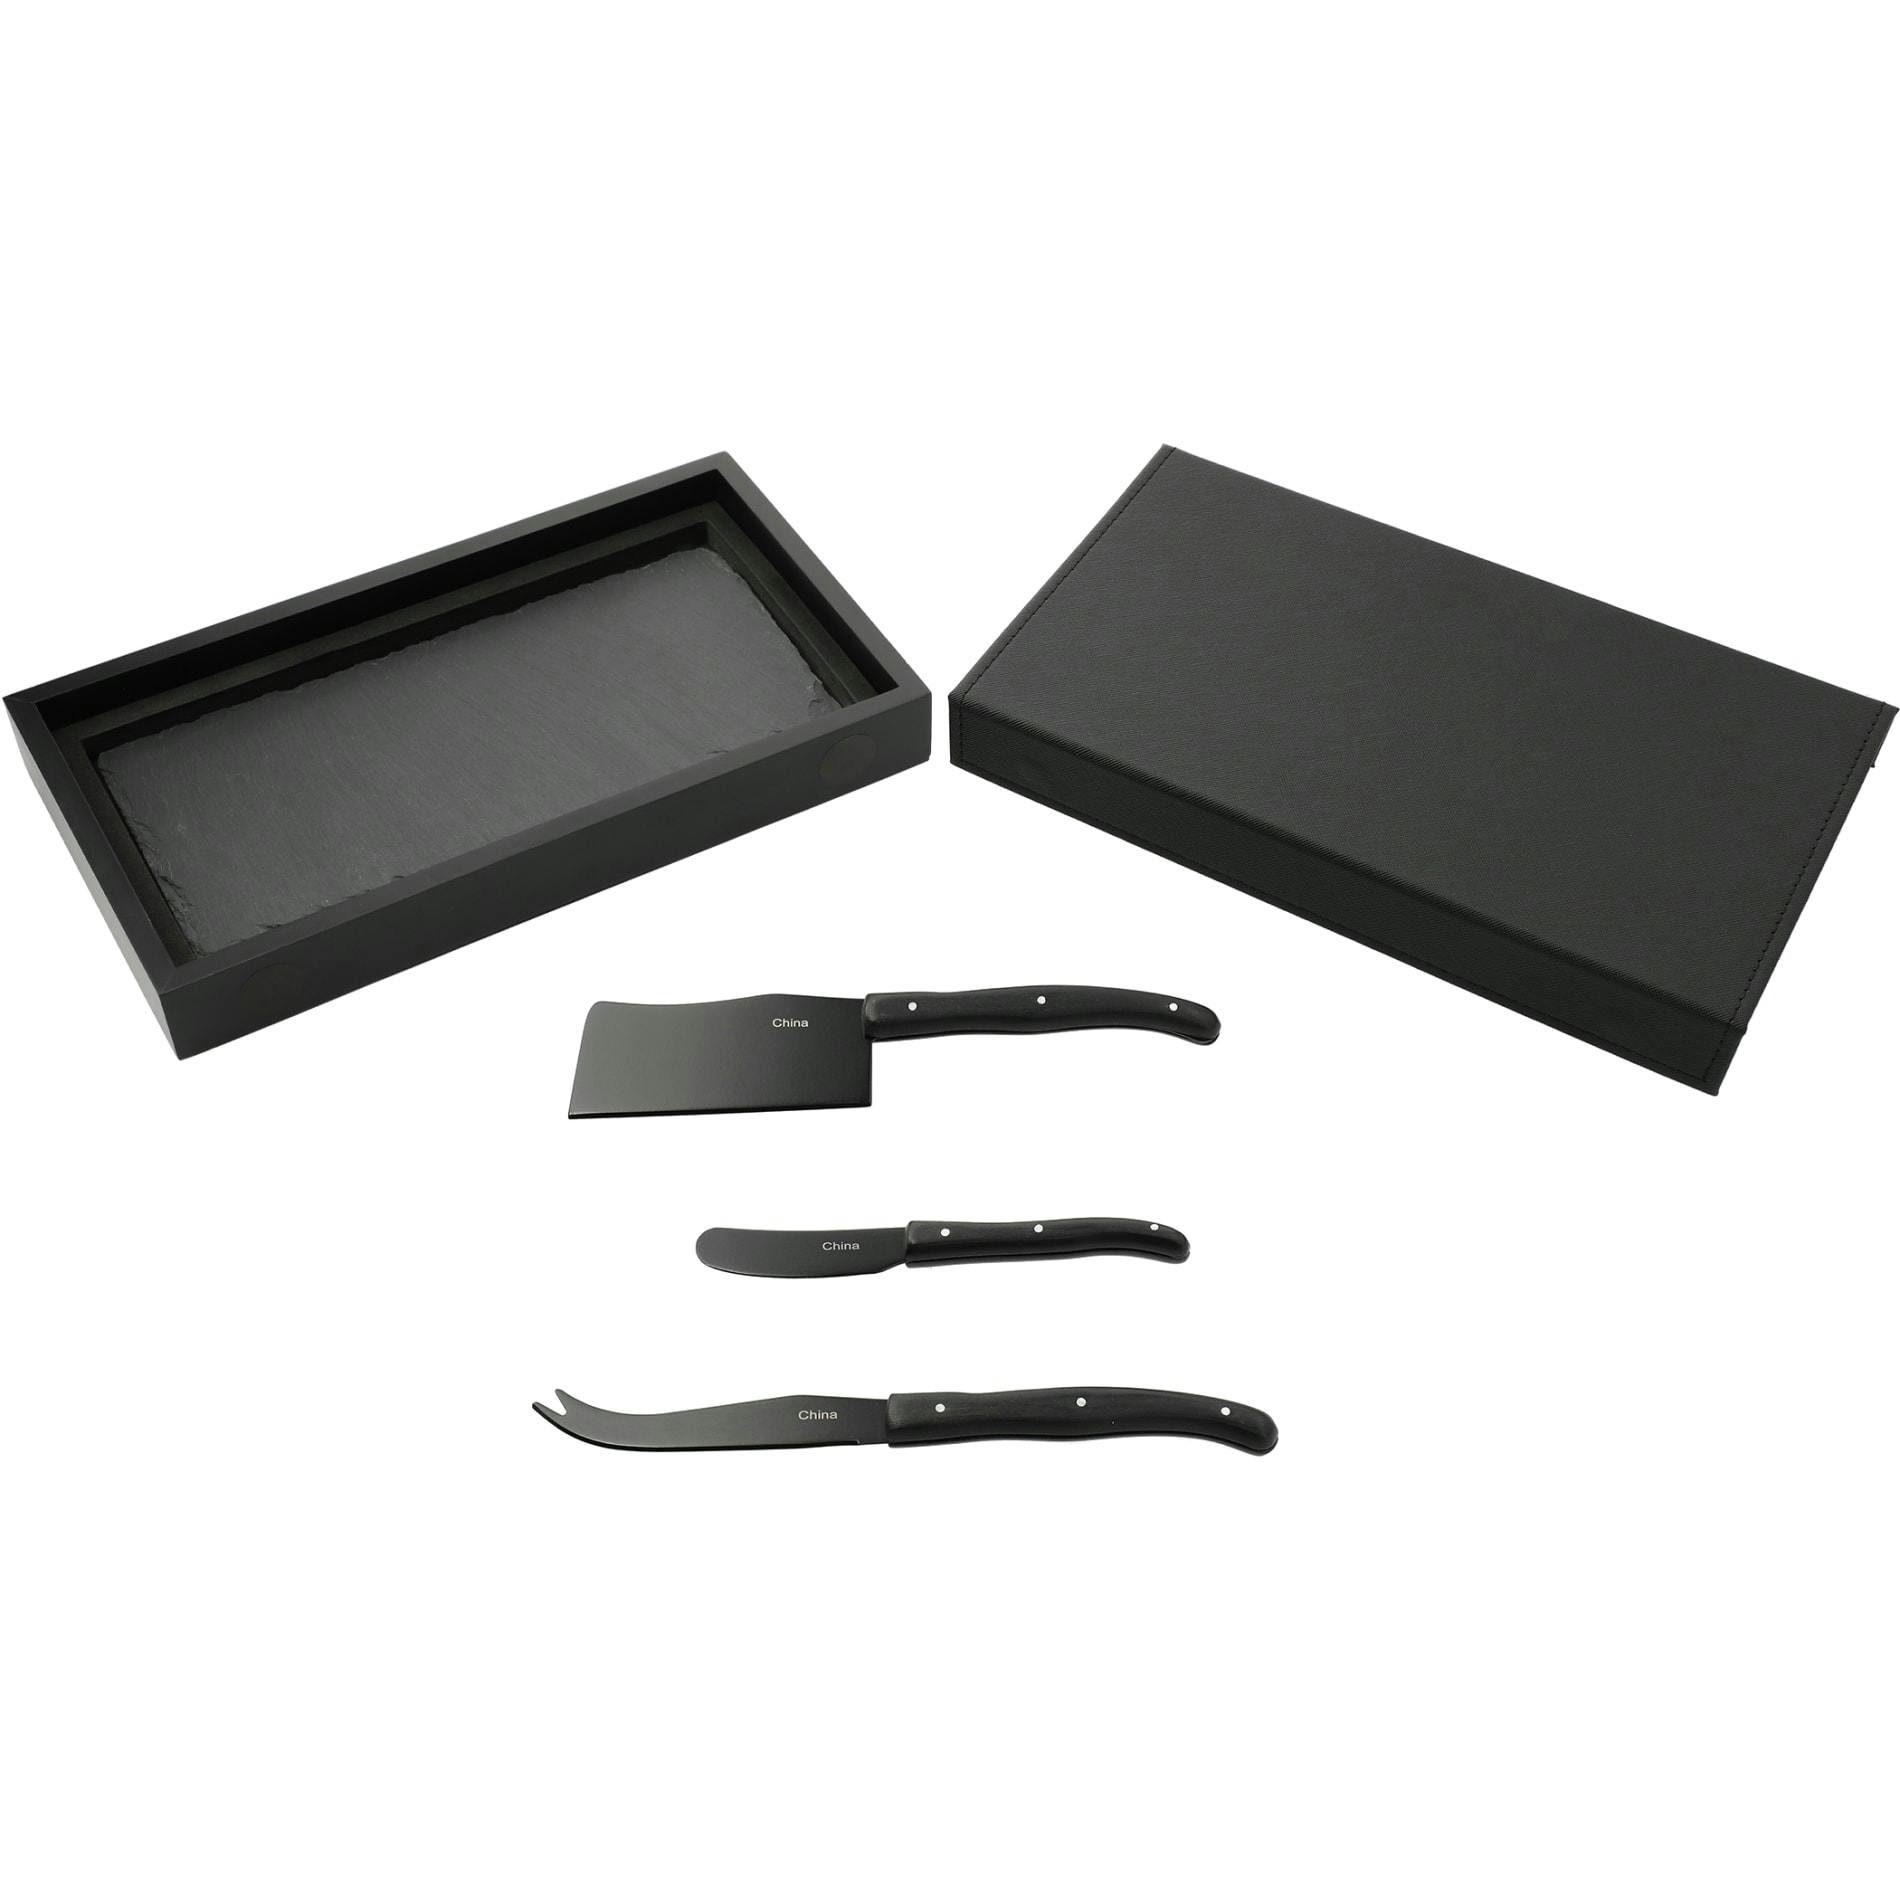 Modena Black Cheese & Serving Set - additional Image 2